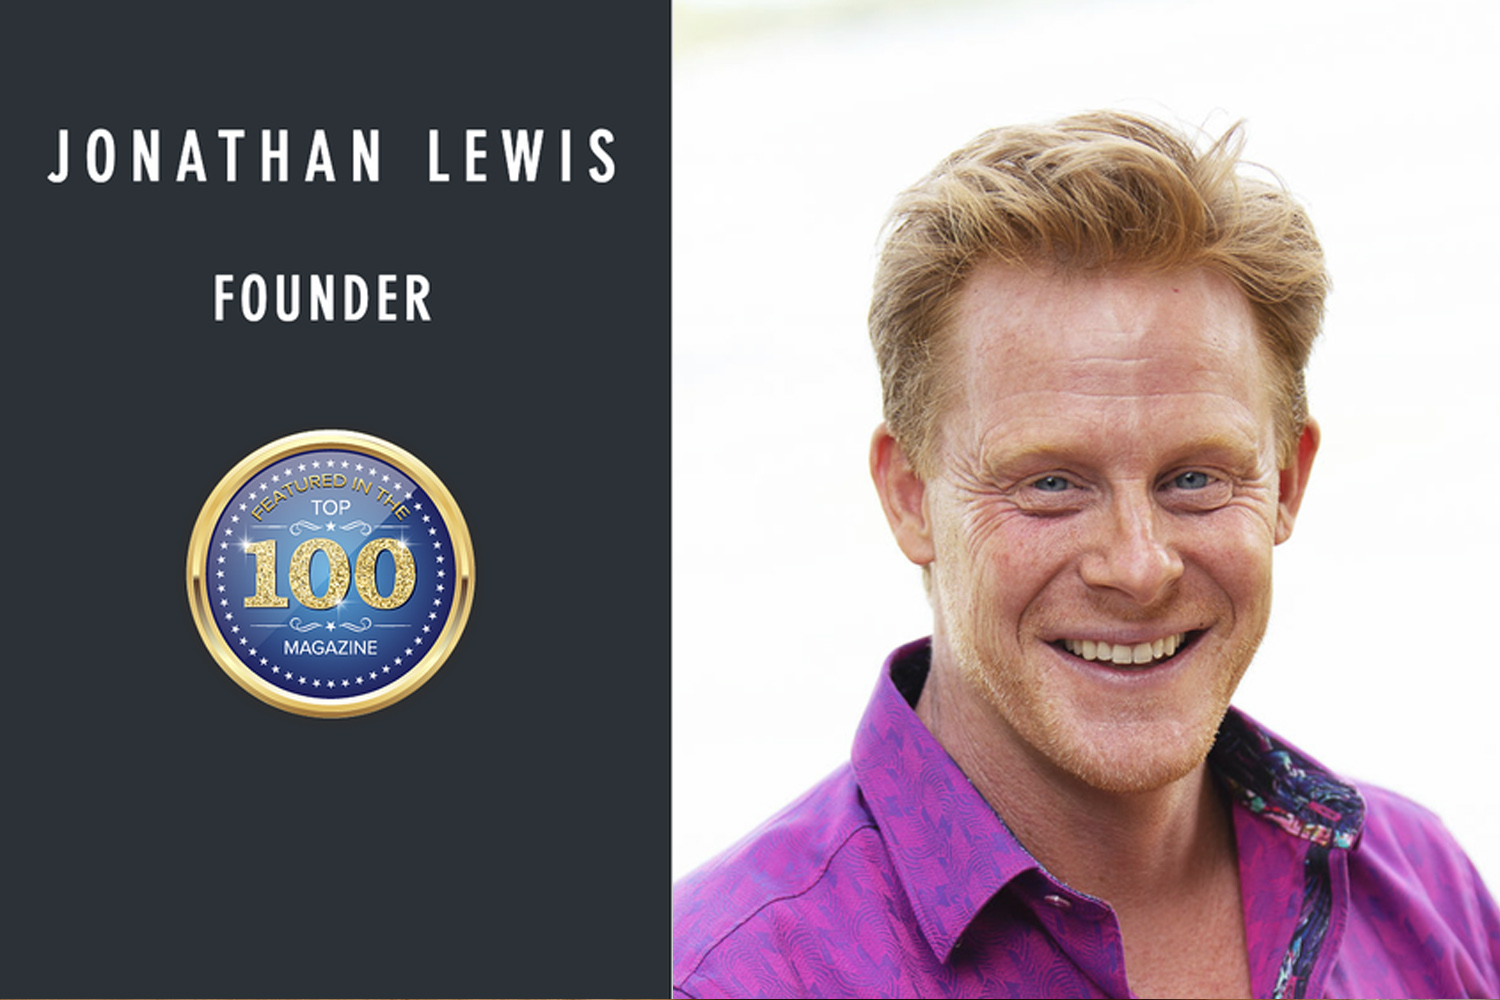 Jonathan Lewis featured in the Top 100 Magazine